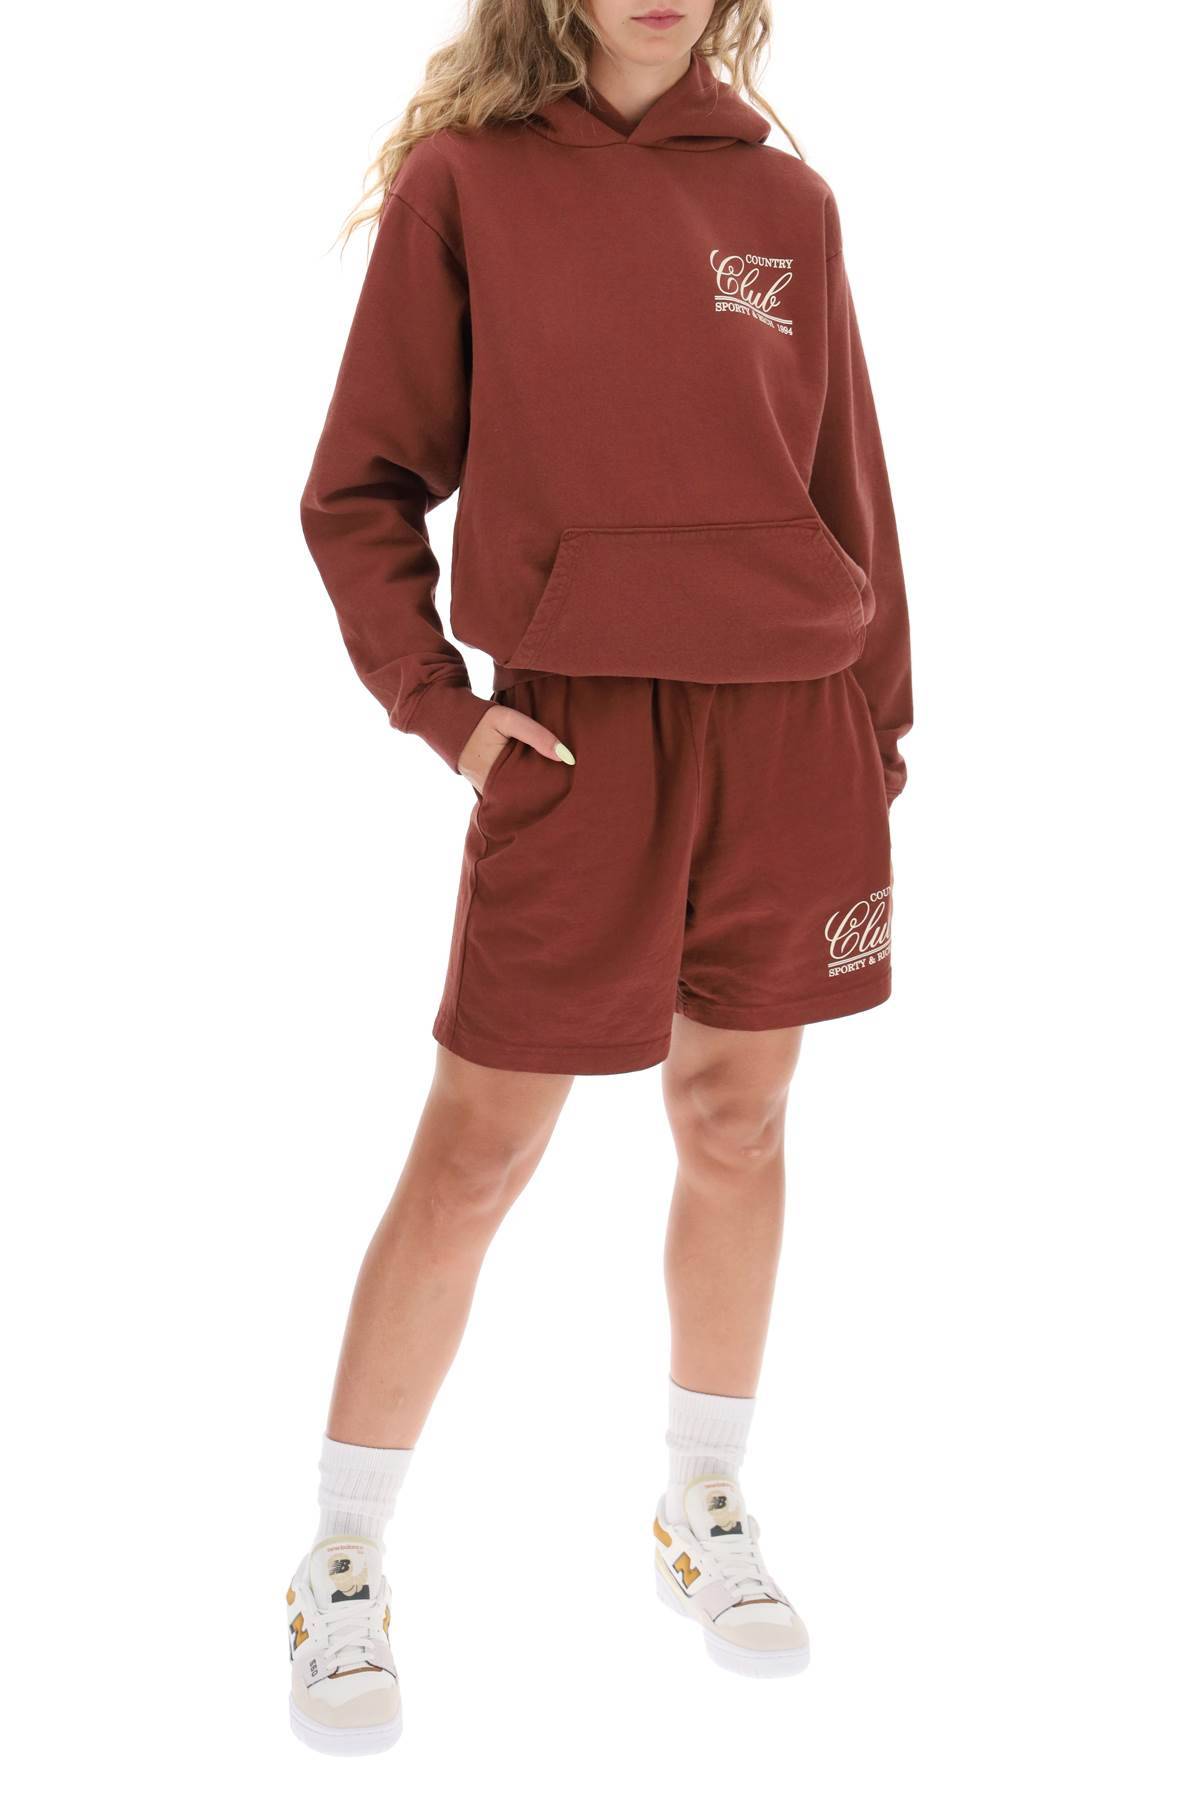 Shop Sporty And Rich '94 Country Club' Gym Shorts In Brown